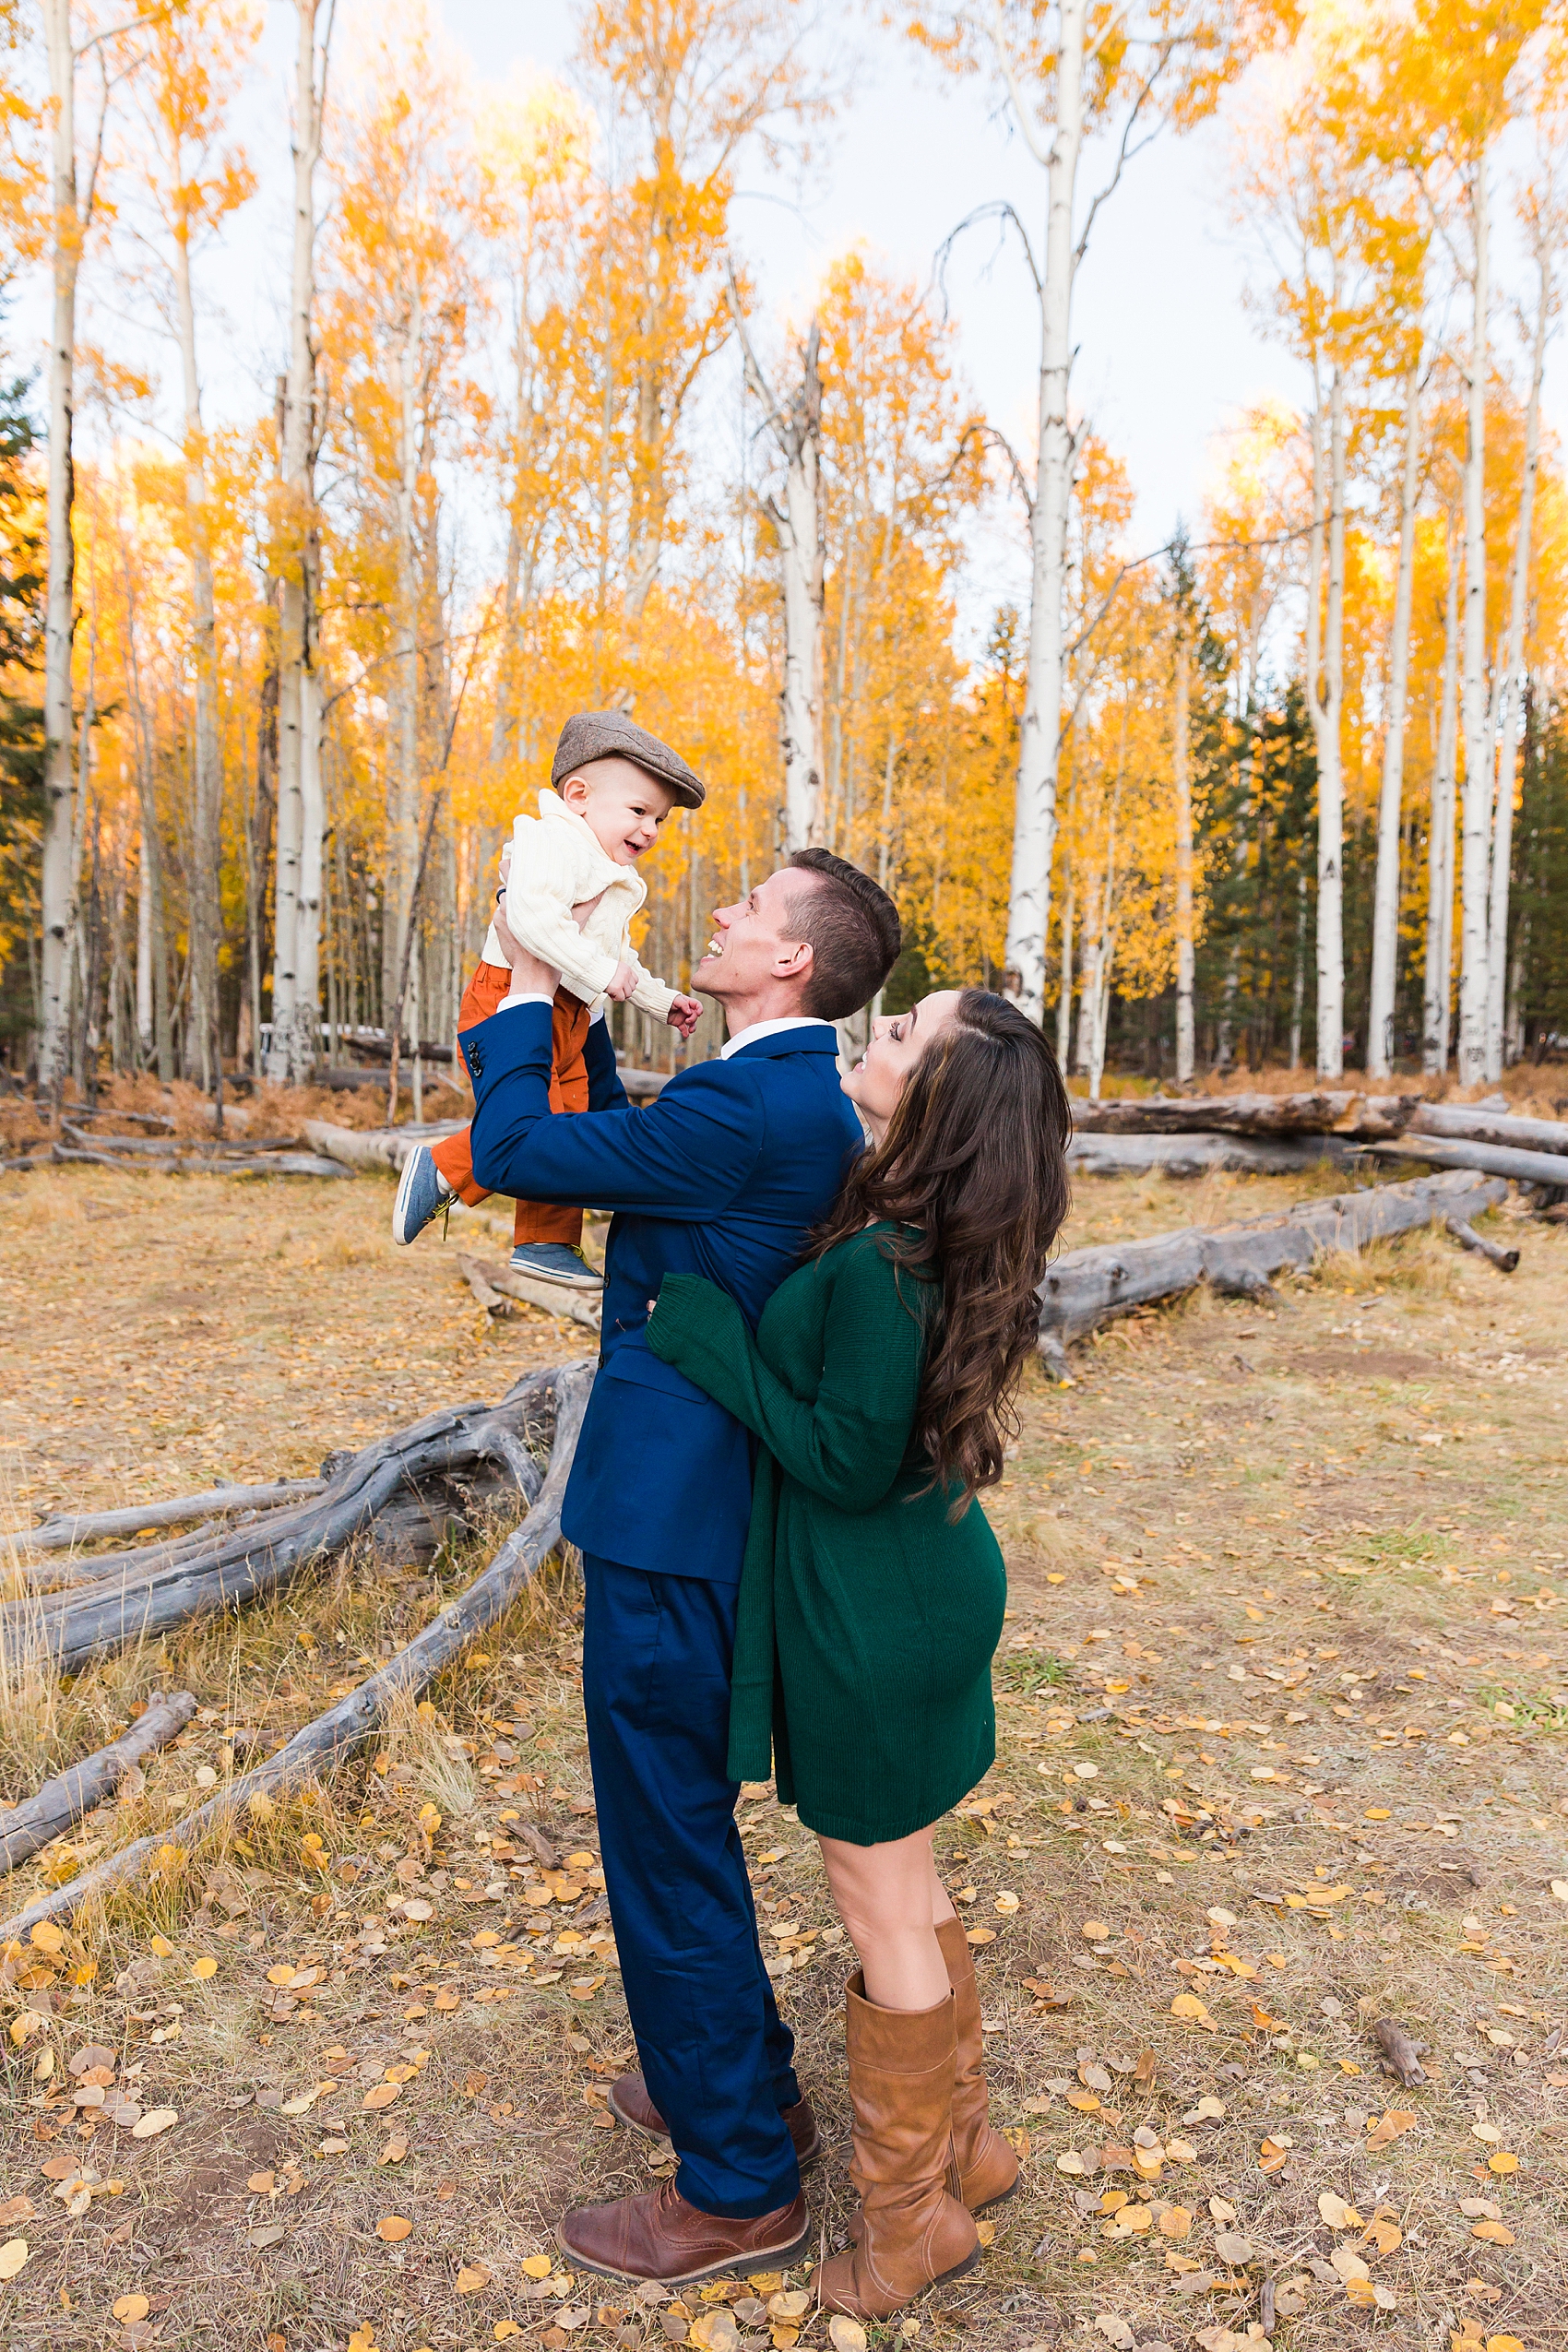 Leah Hope Photography | Flagstaff Arizona | Woods Forest Fall Family Pictures | What to Wear | Family Poses | Aspen Corner | Yellow Leaves Aspens